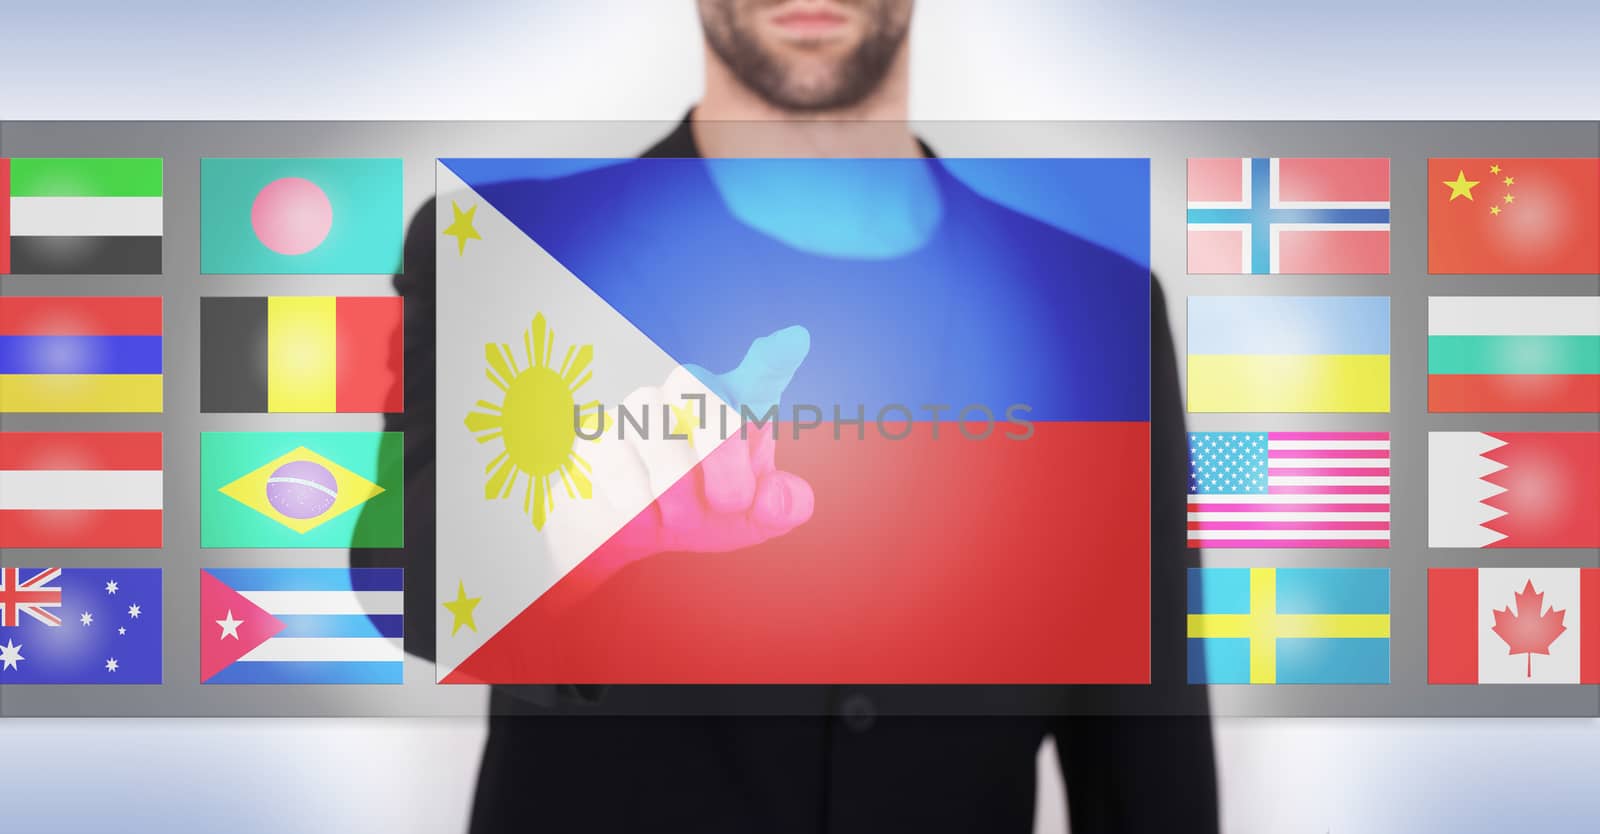 Hand pushing on a touch screen interface, choosing language or country, the Philippines